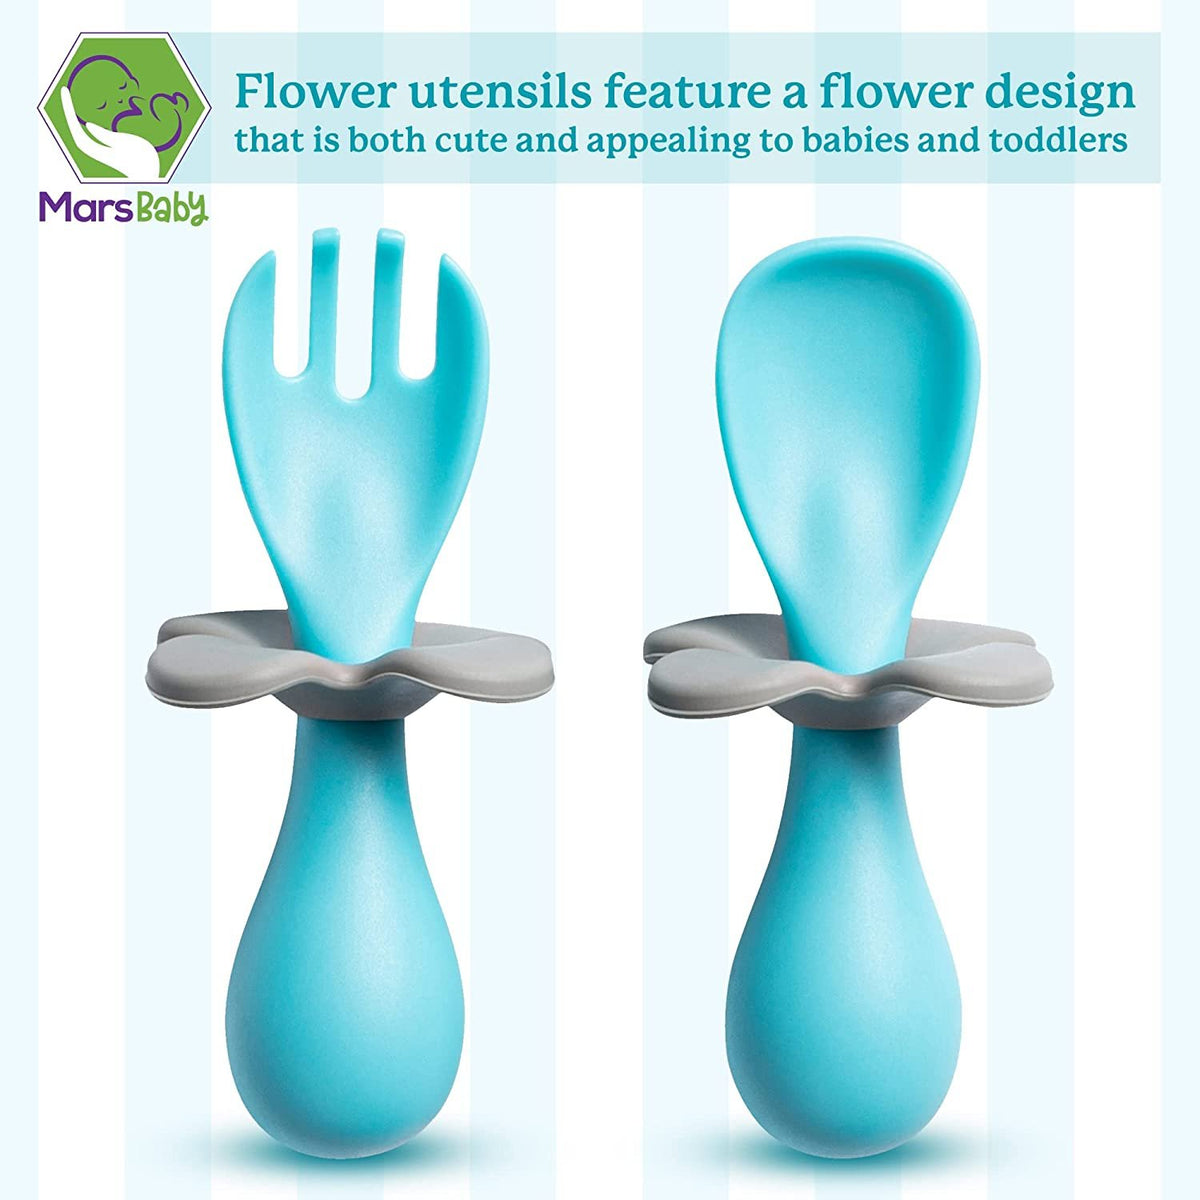 Mars Baby Flower Design Baby and Toddler Self-Feeding Training Utensils - Easy to Hold and Use Led Weaning, Protective Choke Barrier - Blue